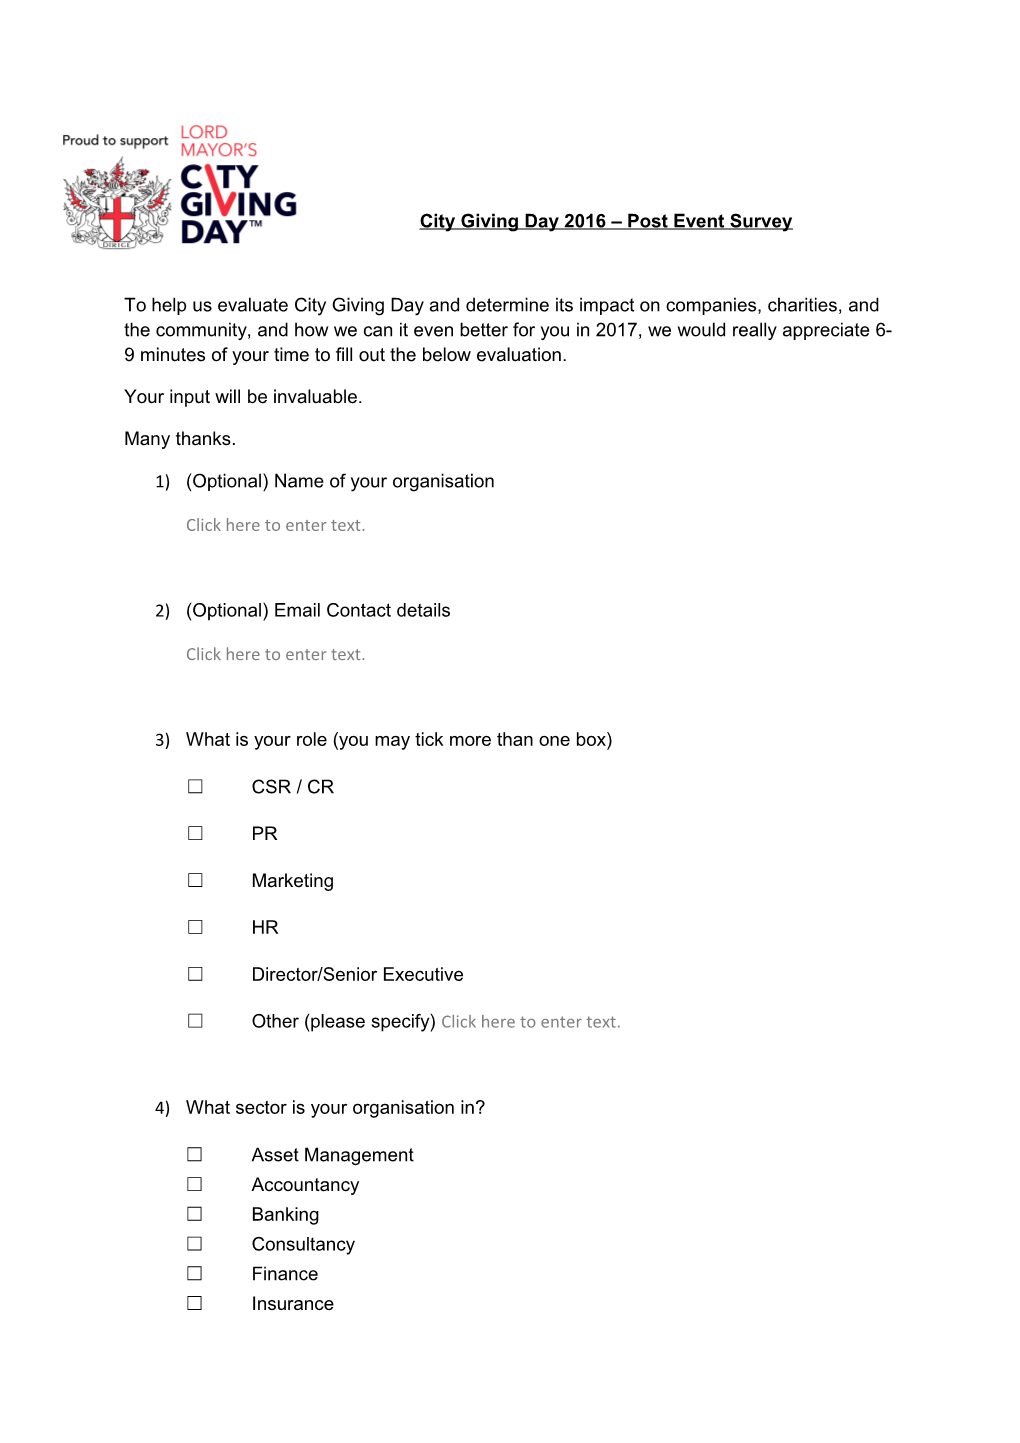 City Giving Day 2016 Post Event Survey